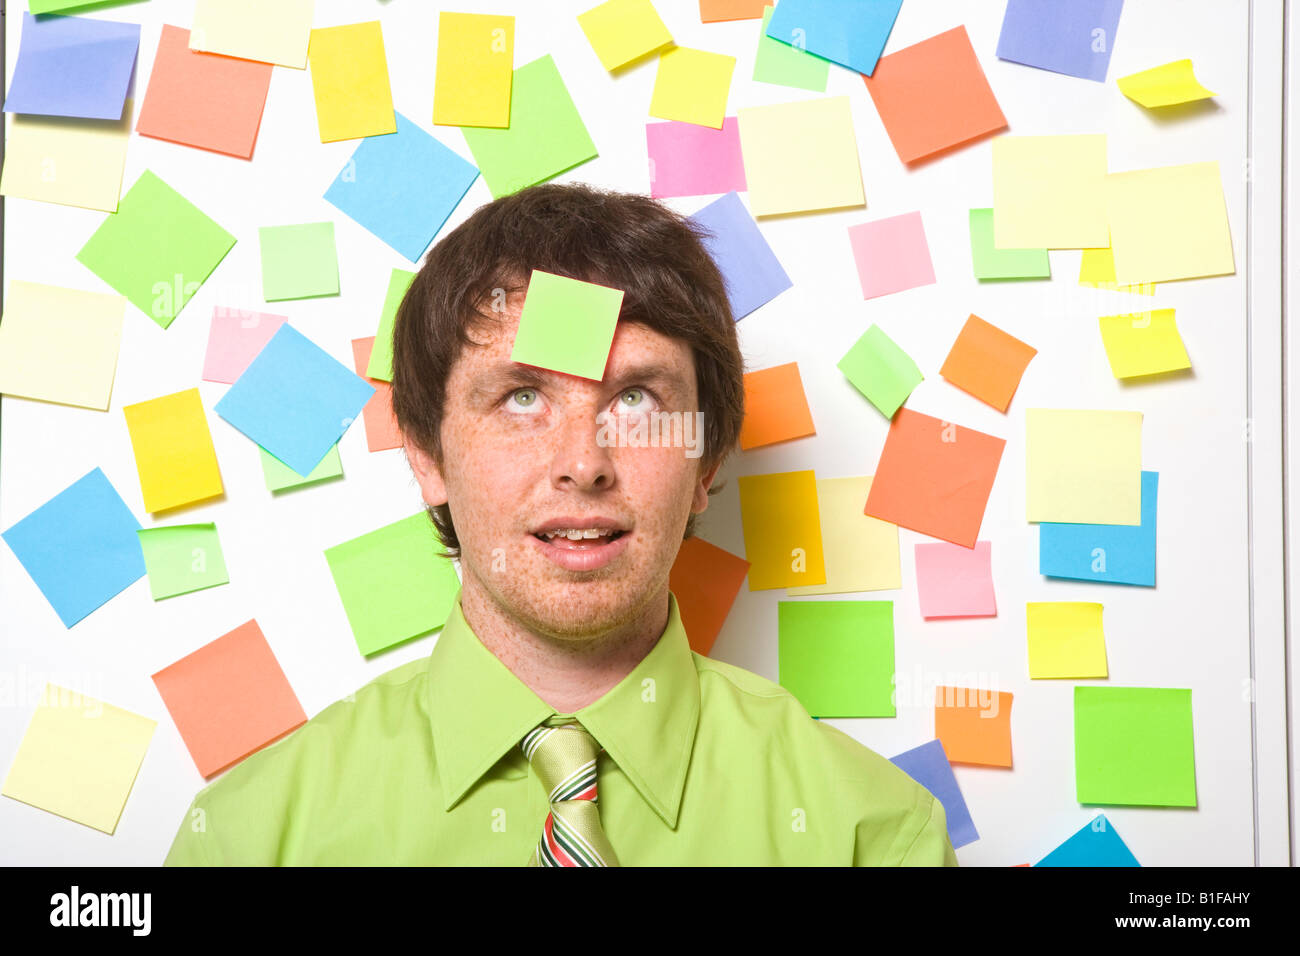 Businessman with adhesive note on forehead Stock Photo